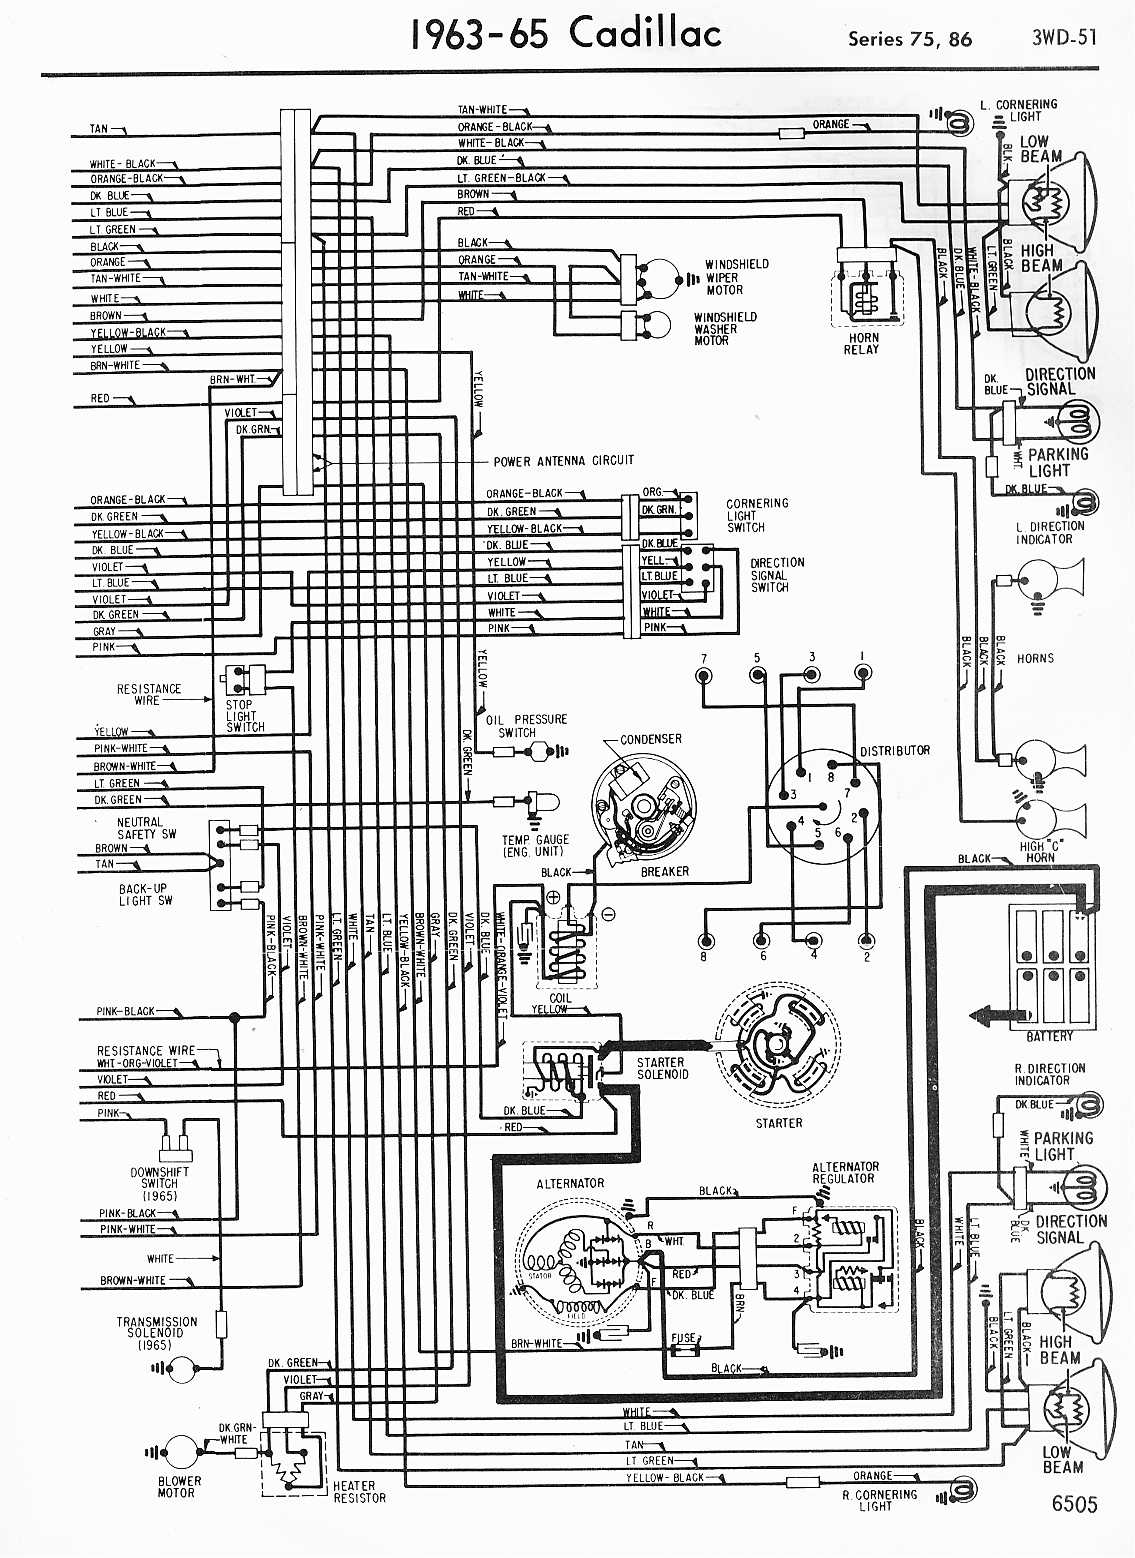 92 Cadillac Seville Radio Wiring Diagram from www.oldcarmanualproject.com